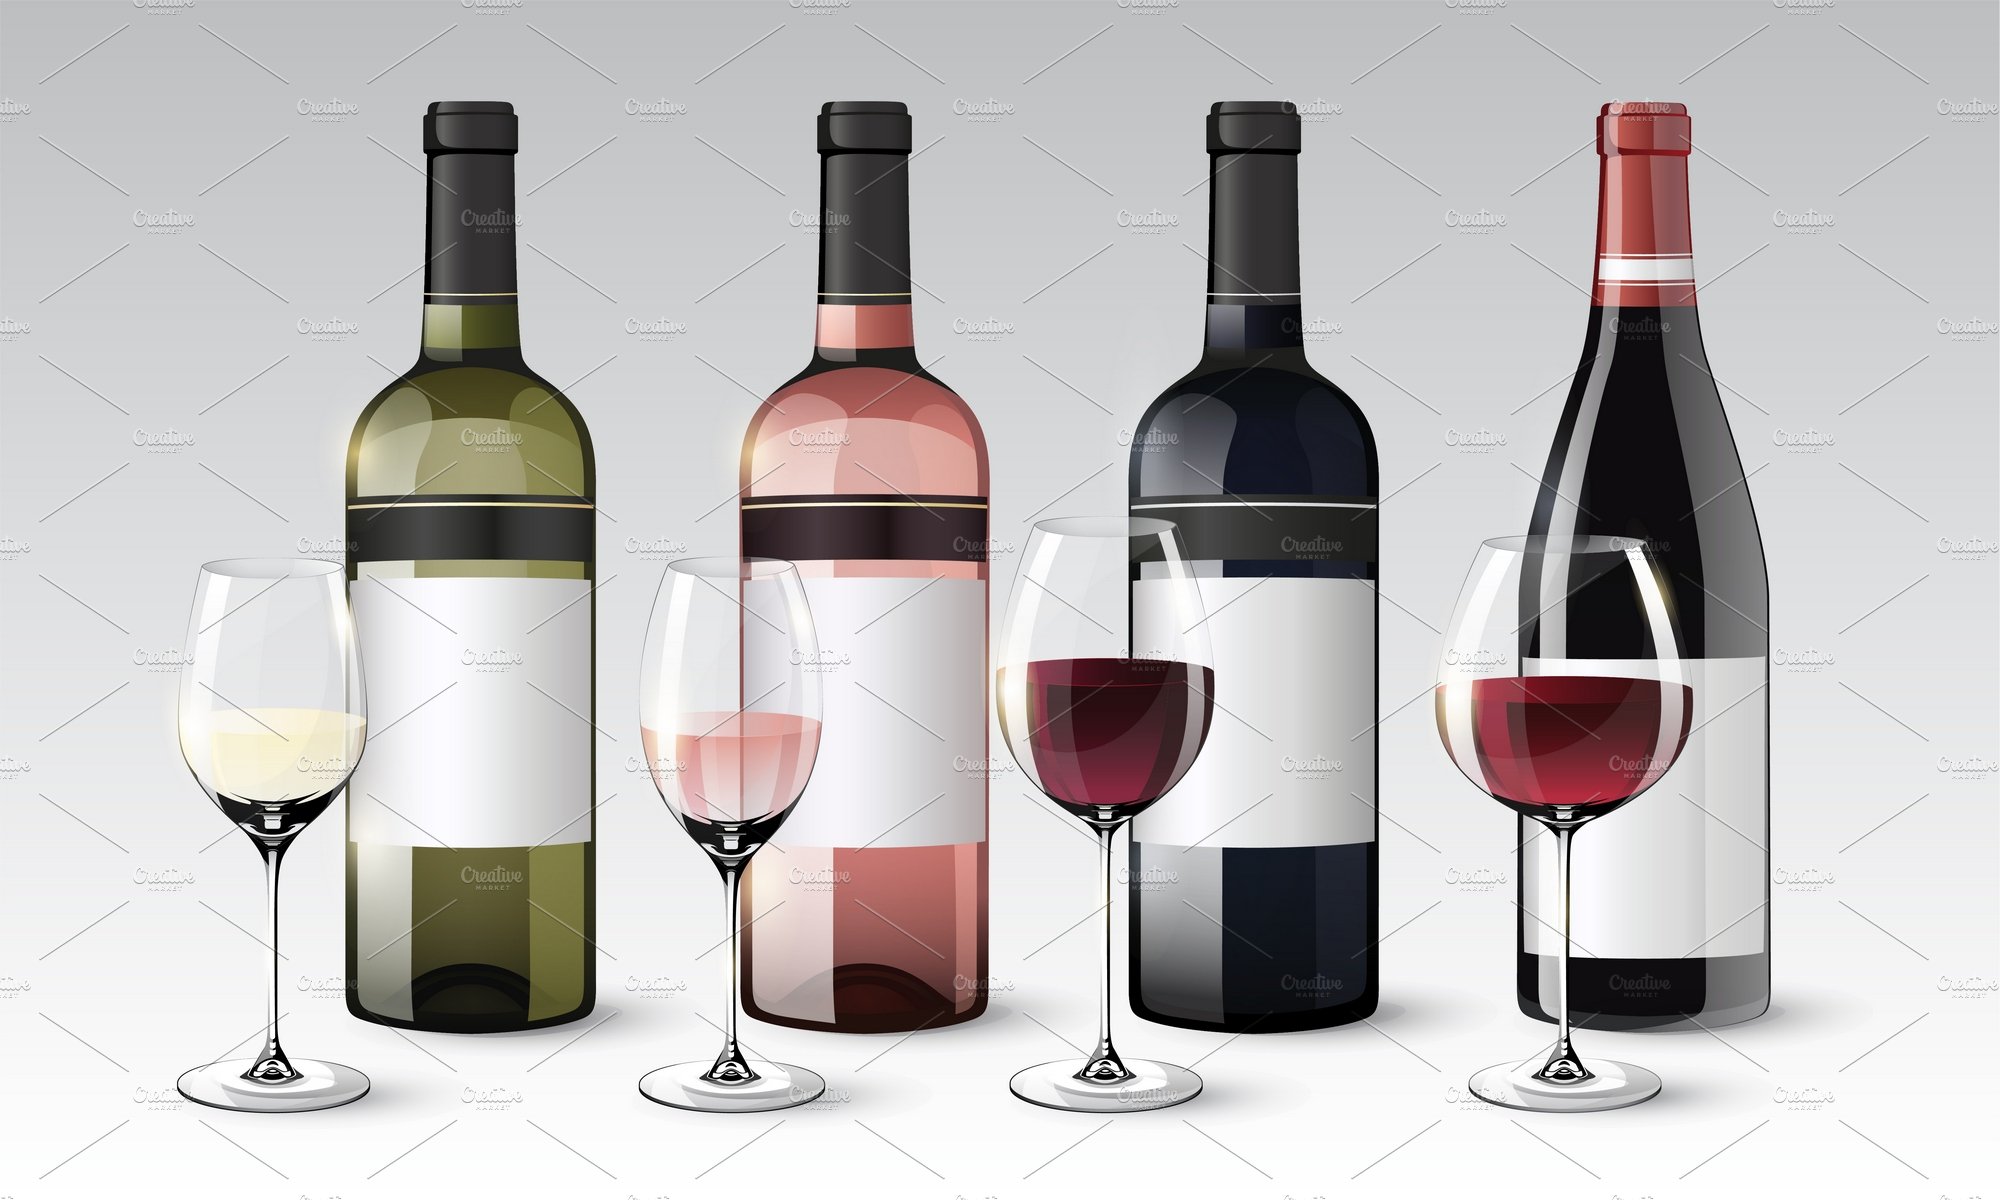 Realistic Wine Collection cover image.